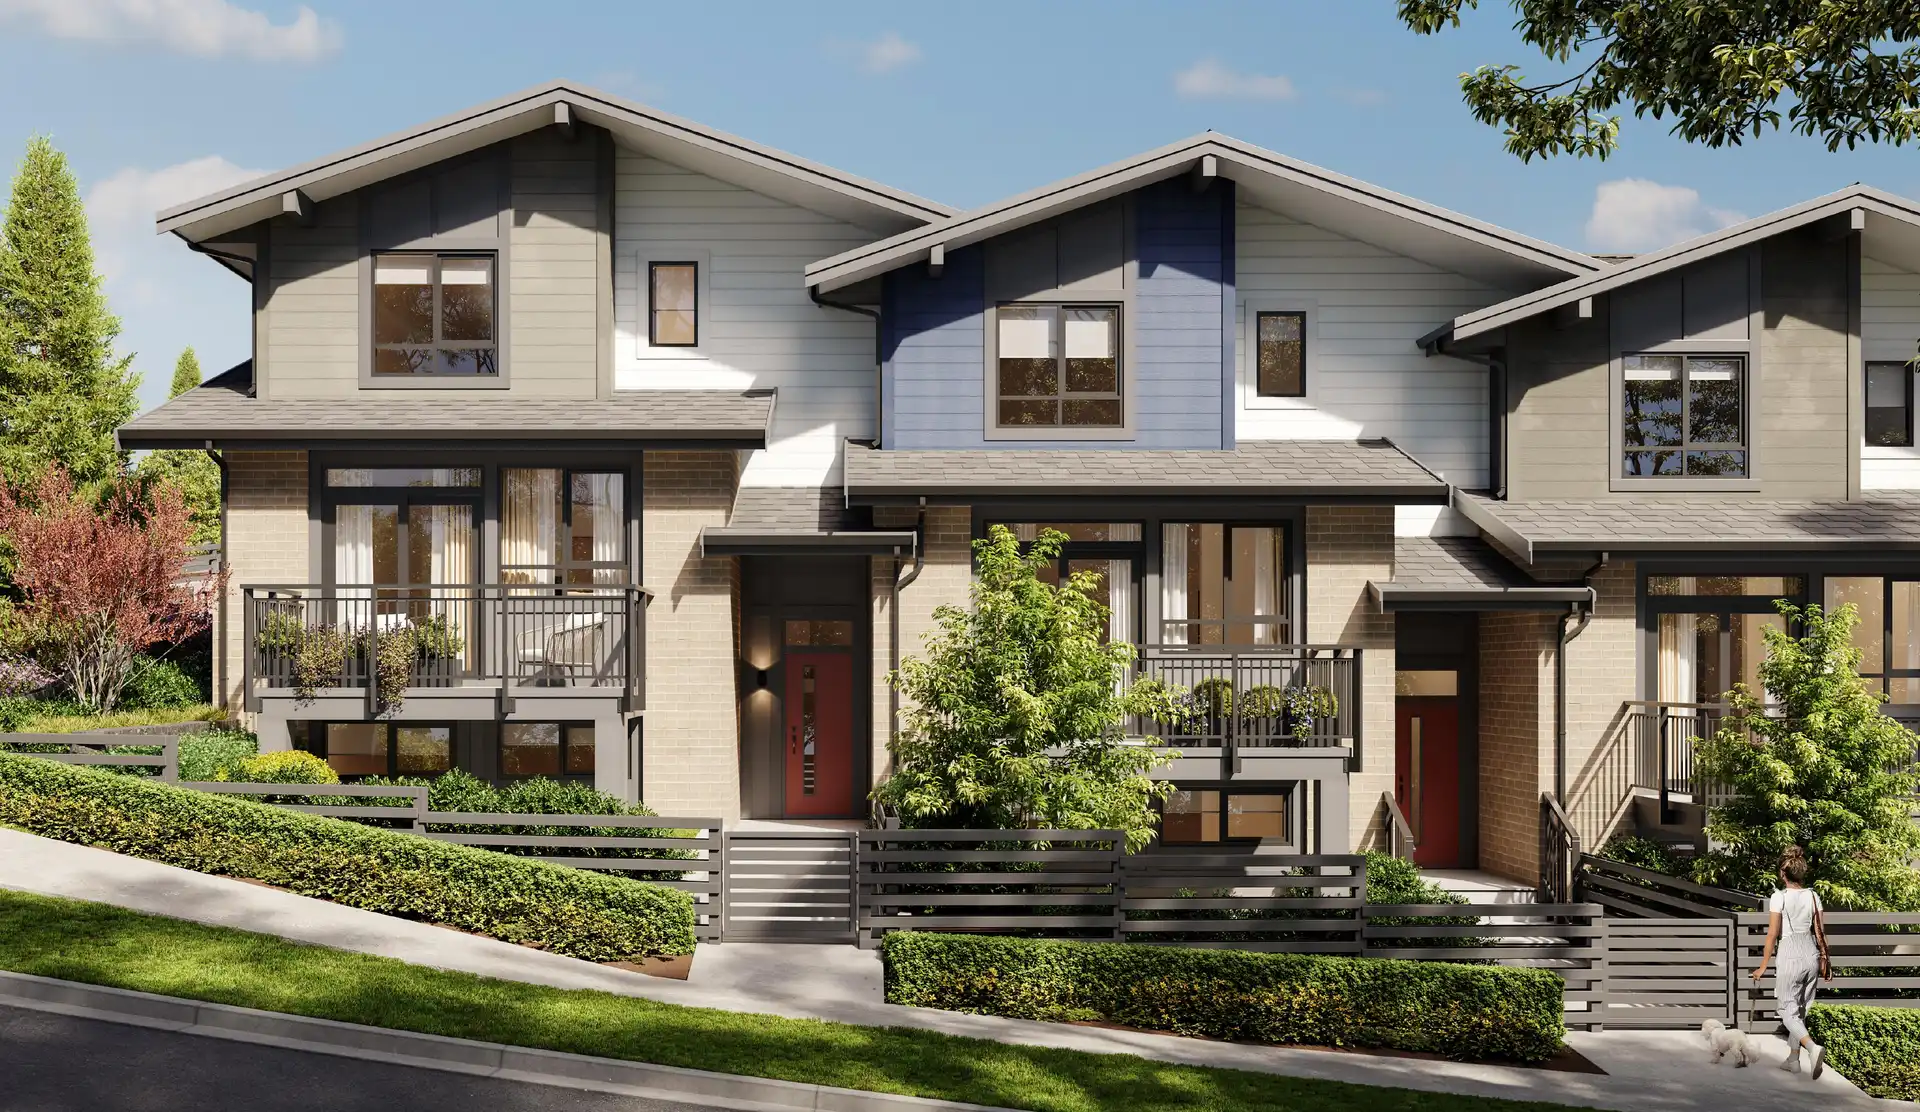 Heartwood Townhomes is a new Burke Mountain community by StreetSide Developments at 3535 Highland Drive